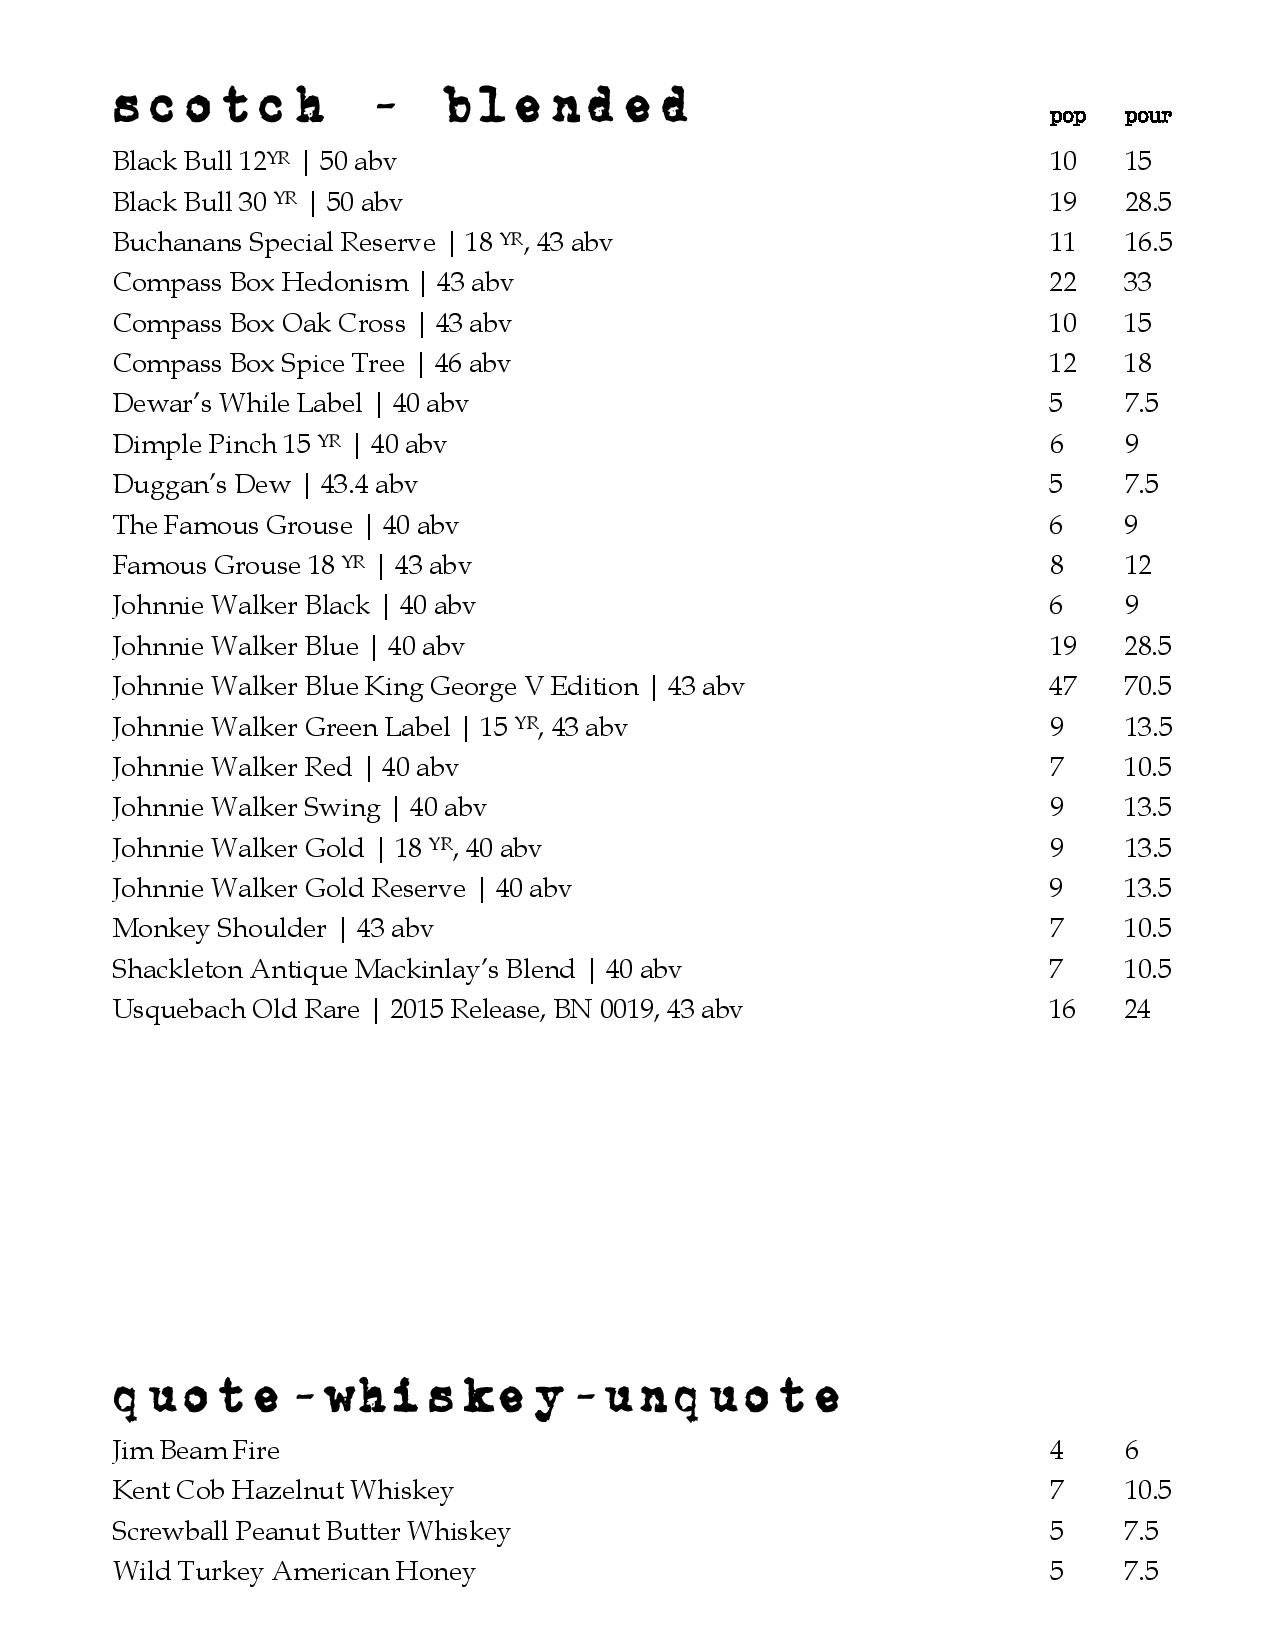 QH Whisky 1.2-page-012.jpg